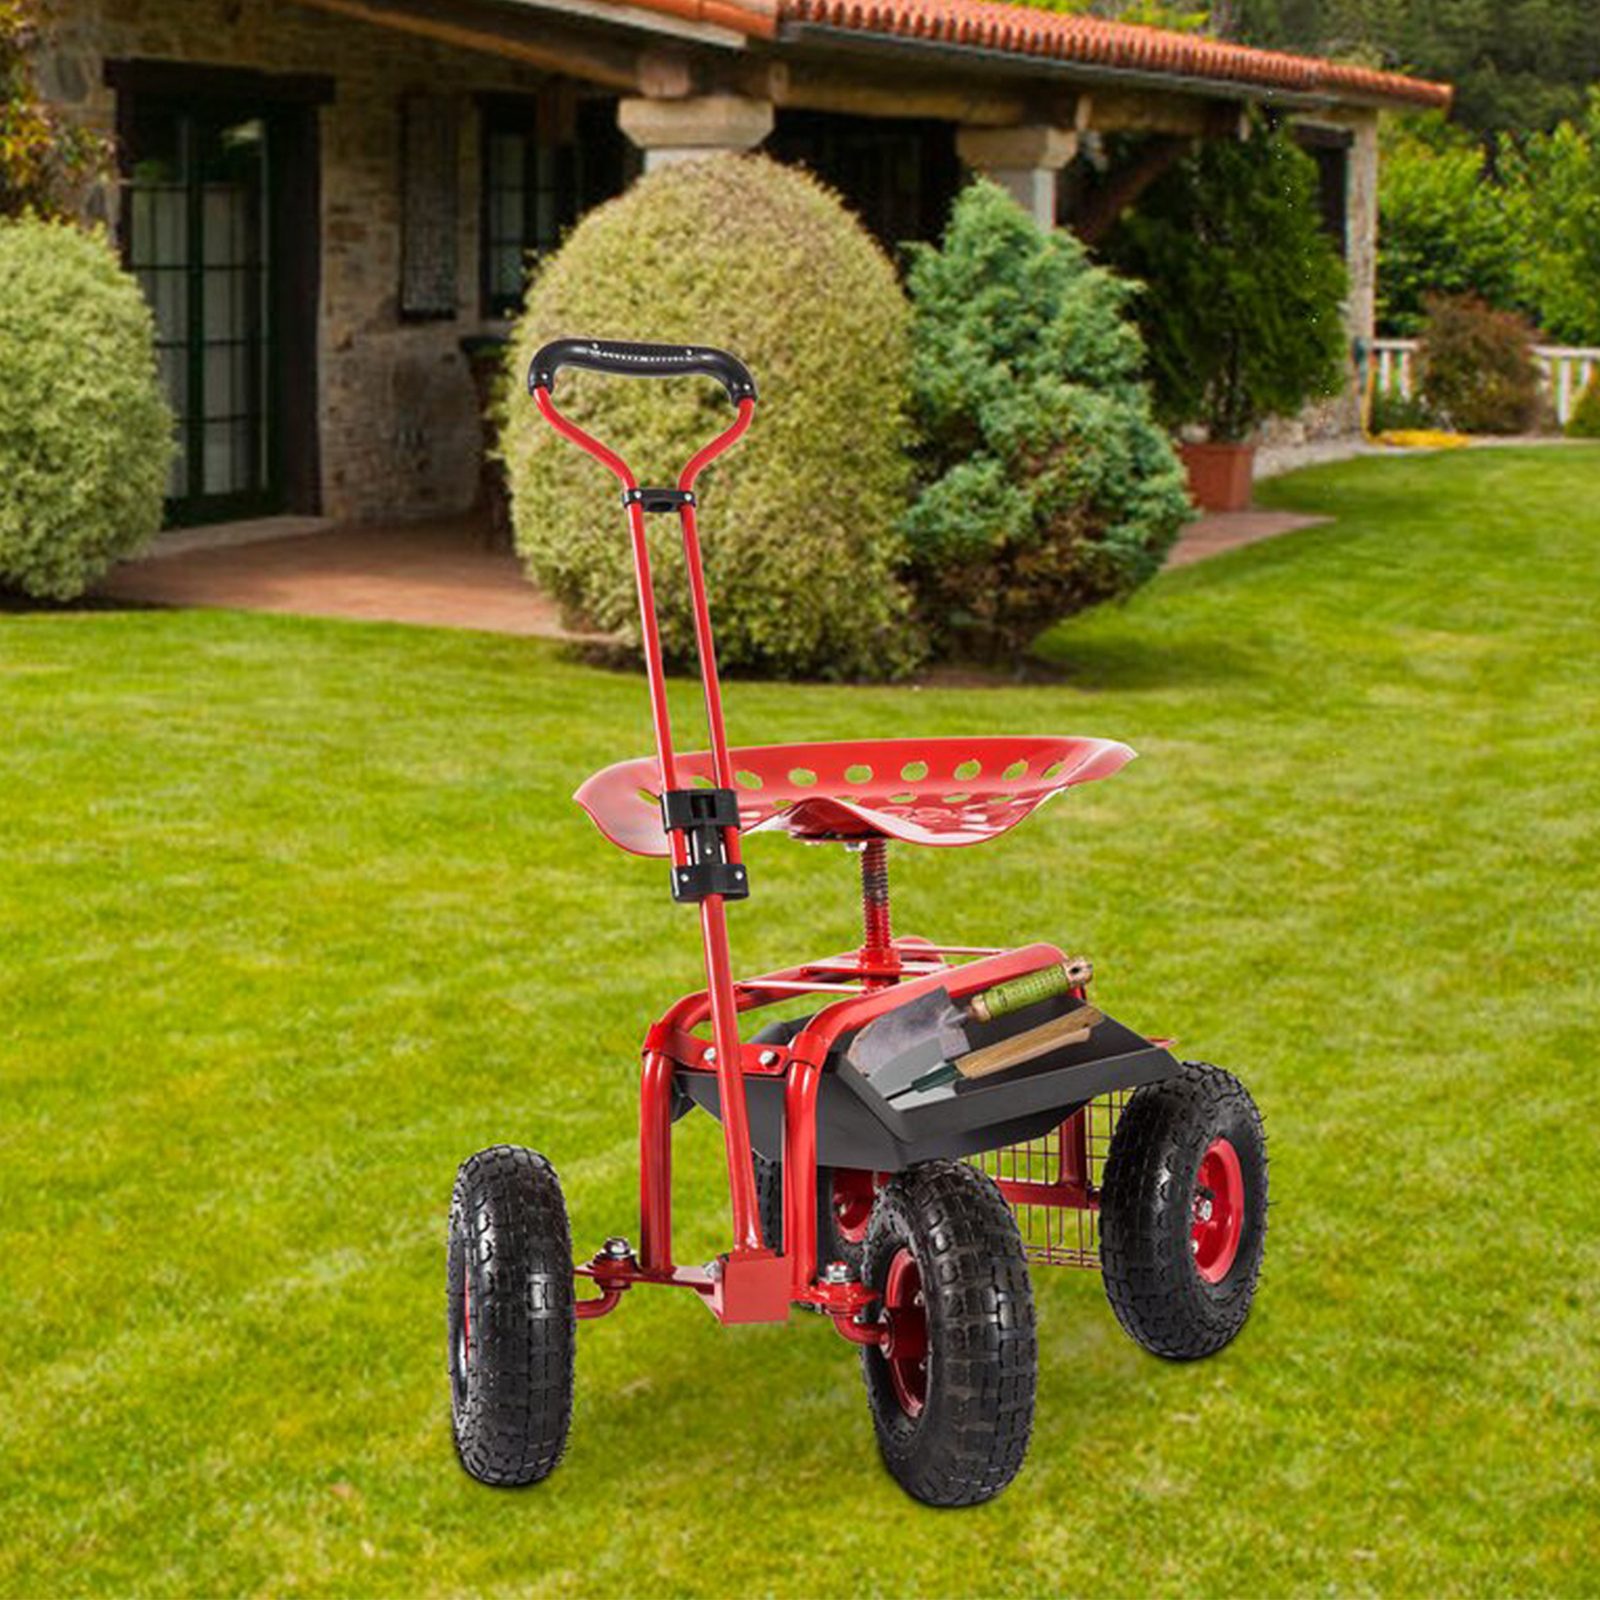 RuBao Garden Cart Rolling Scooter with Seat Durable Garden Cart Seat for Outdoor Utility Lawn Yard Patio